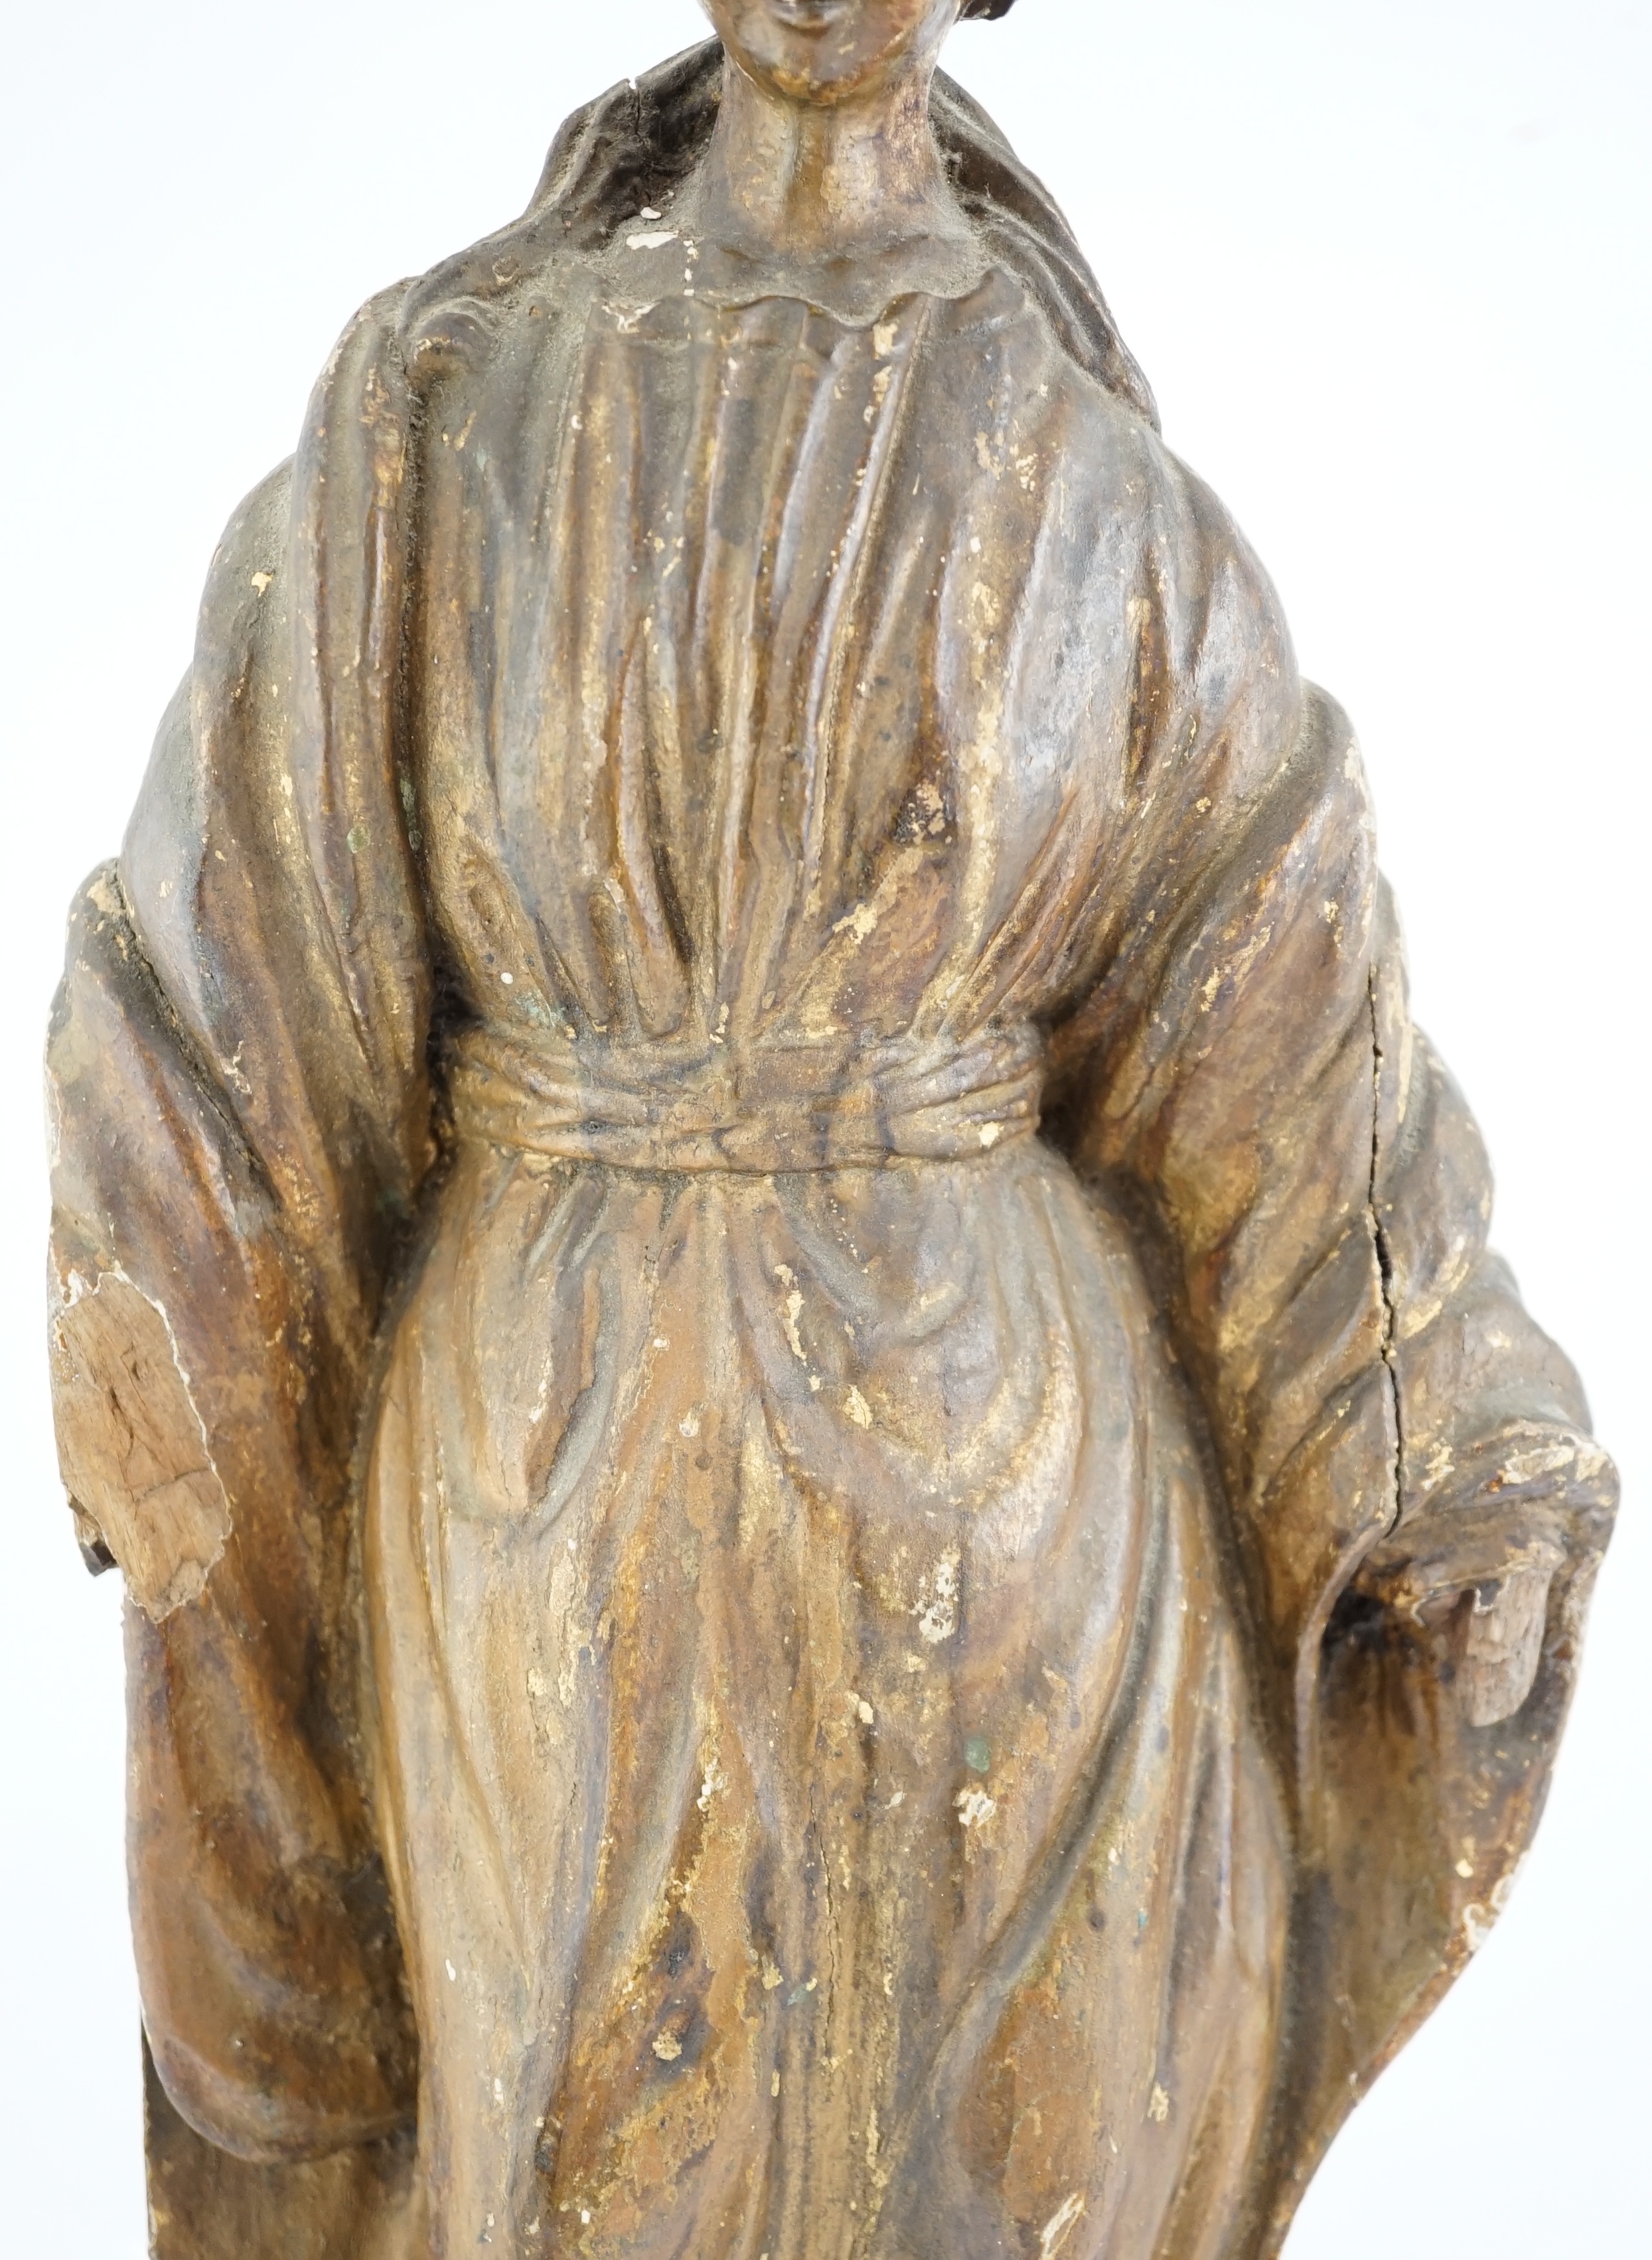 An 18th century Continental carved wood figure of a female saint